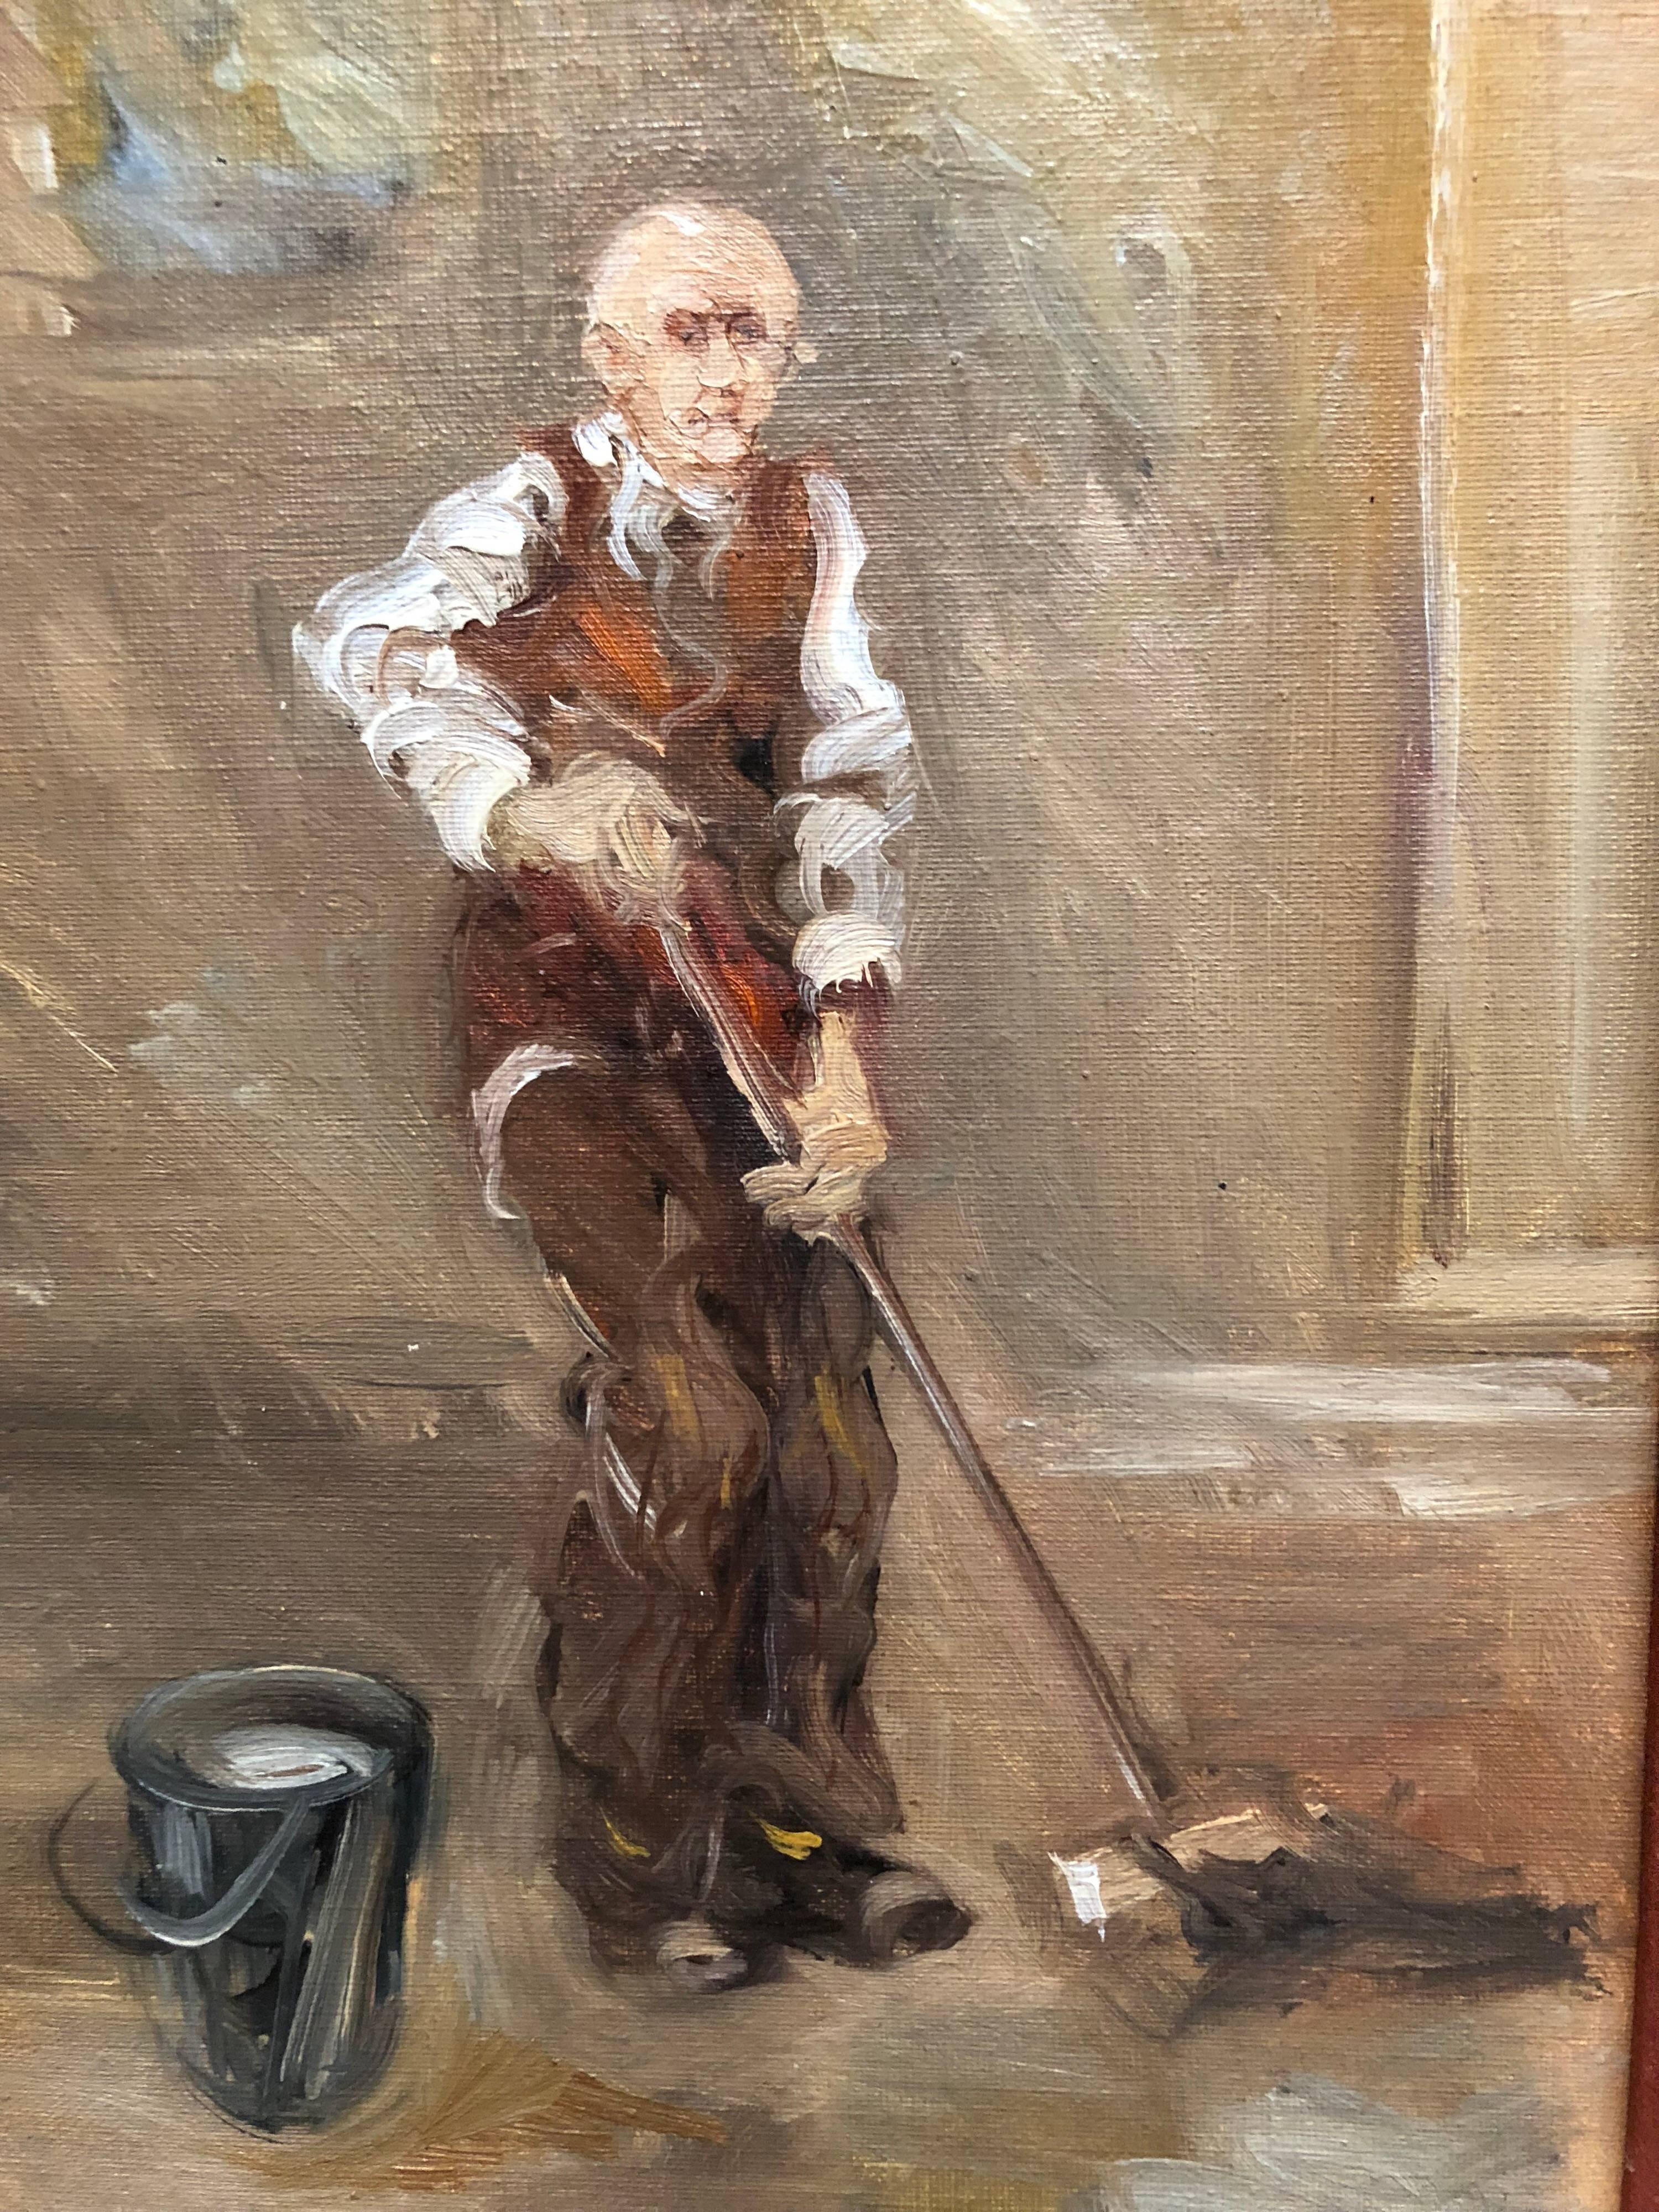 the janitor who paints